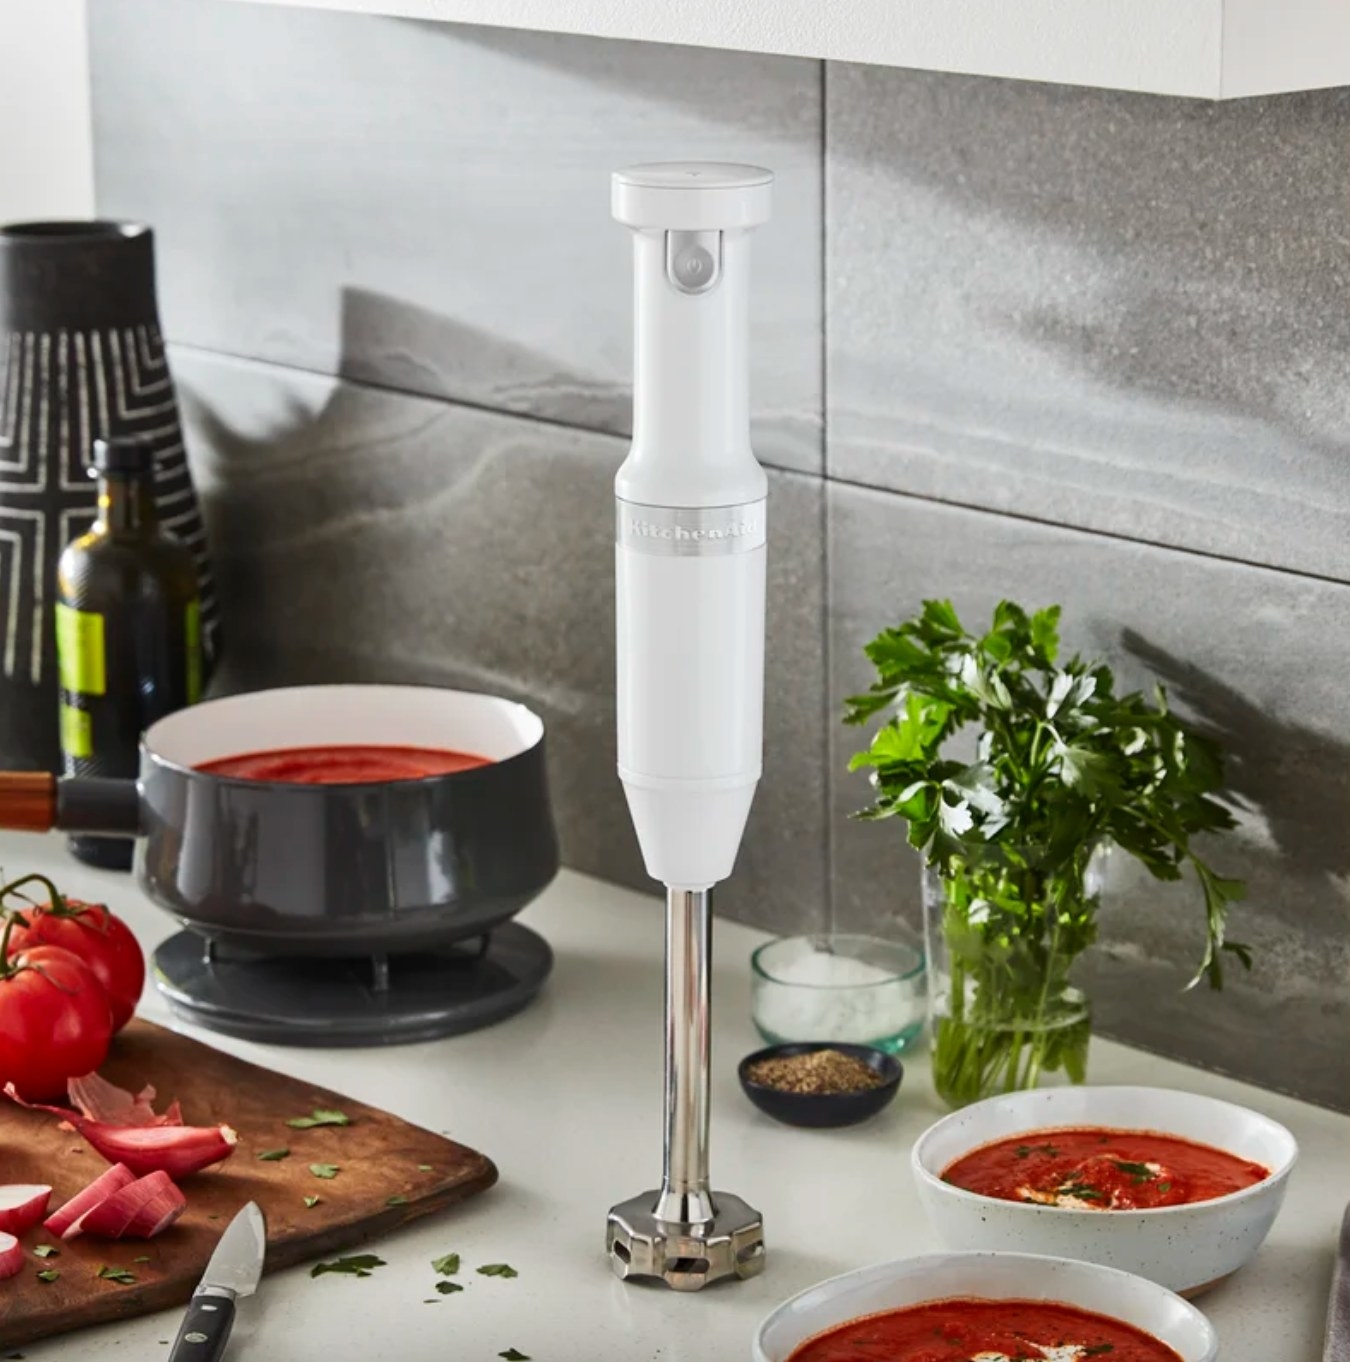 the white cordless hand blender on a counter with bowls of tomato soup